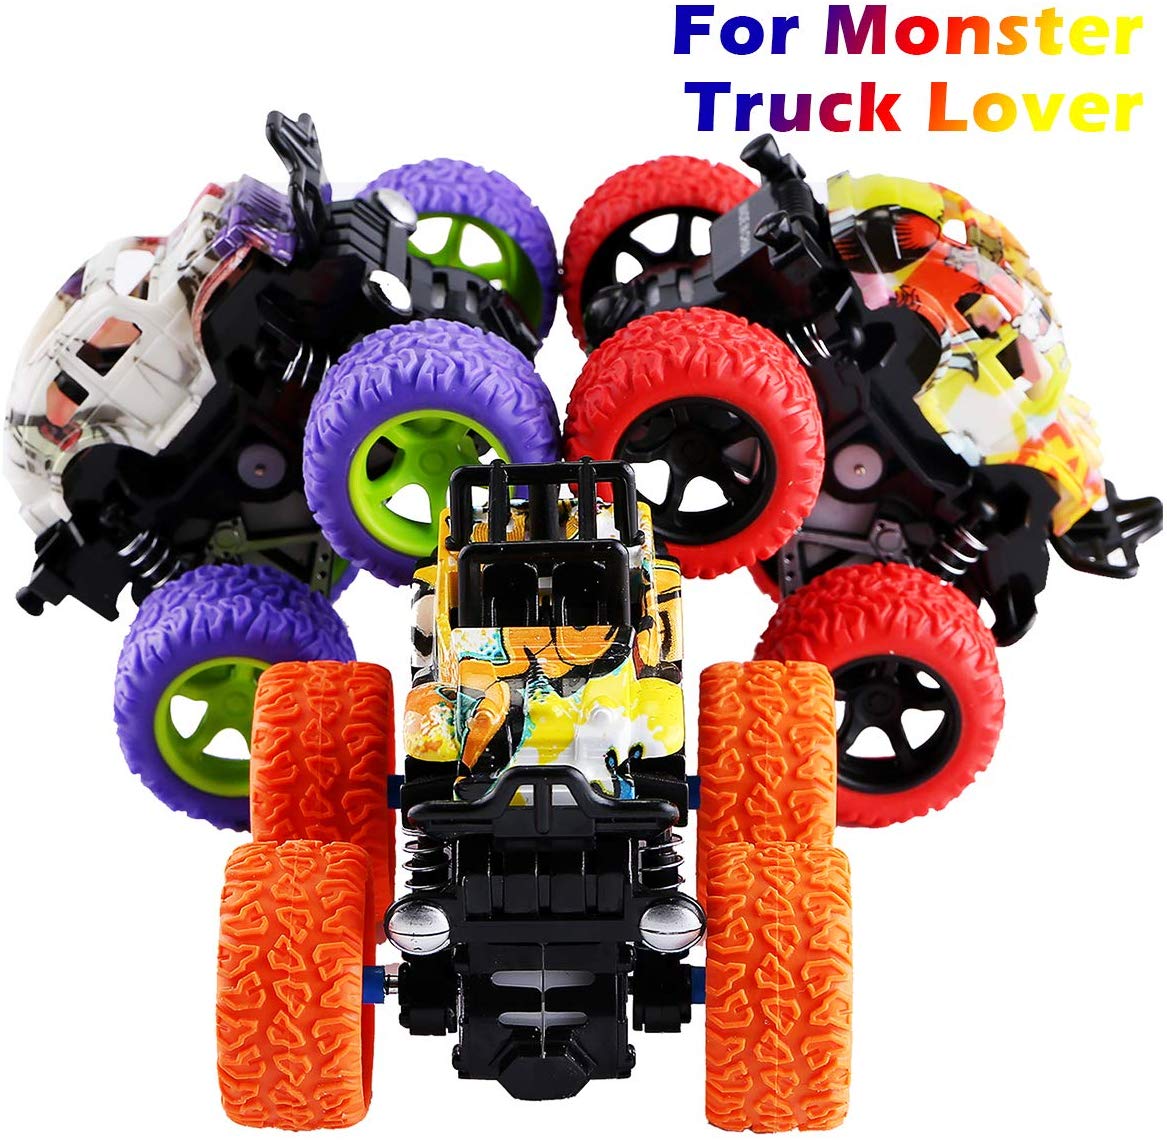 Monster Trucks Toys for Boys - Friction Powered 3-Pack - Top Toys and Gifts for Four Year Old Boys 2